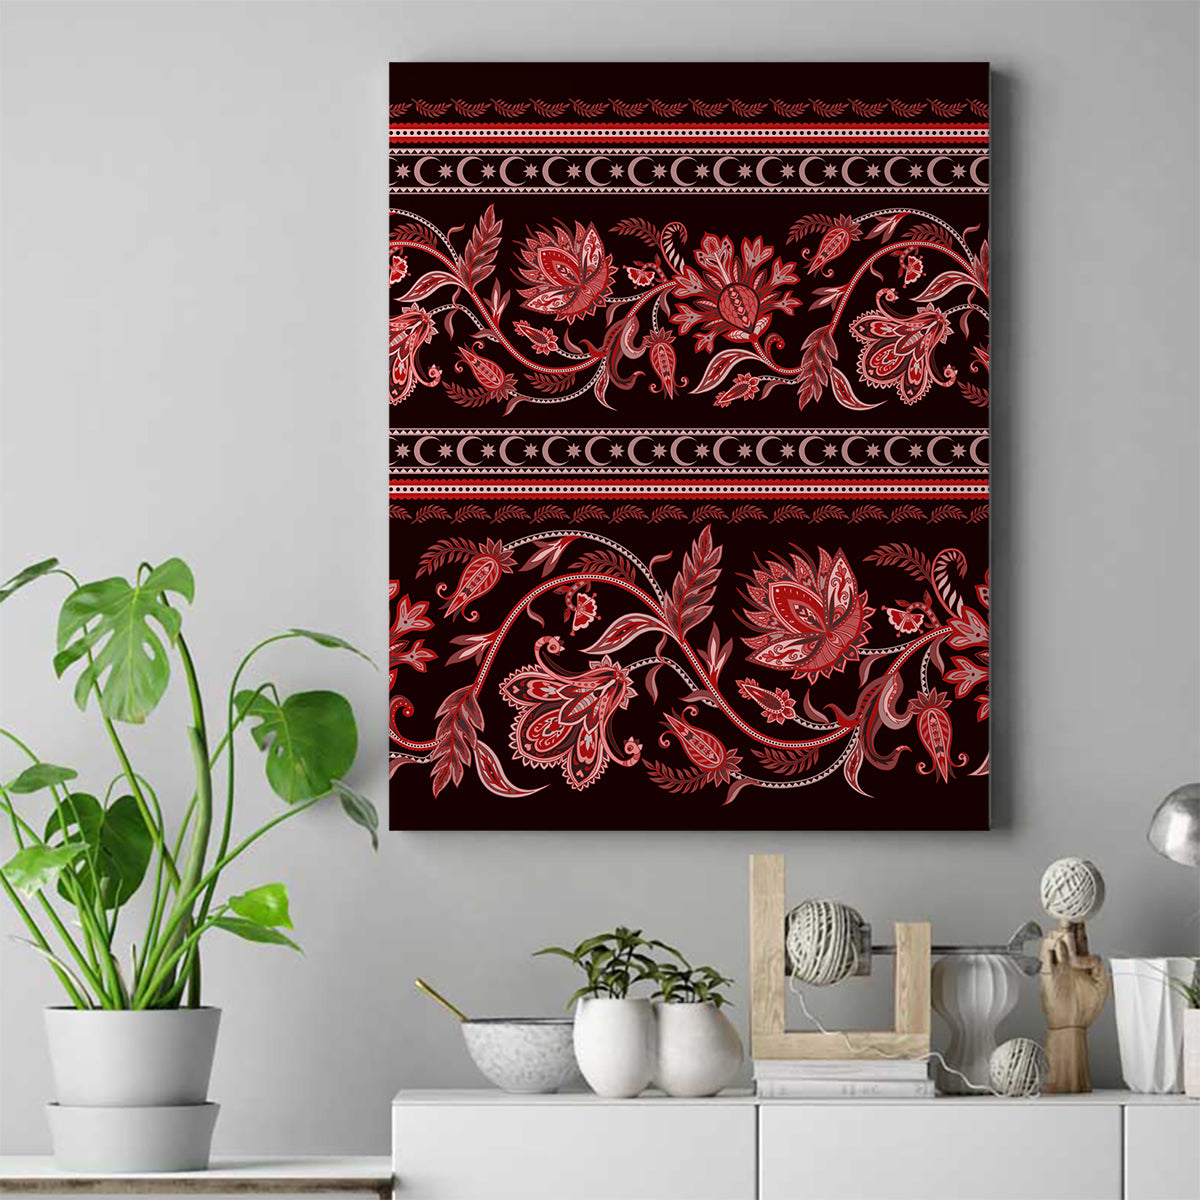 azerbaijan-canvas-wall-art-traditional-pattern-ornament-with-flowers-buta-red